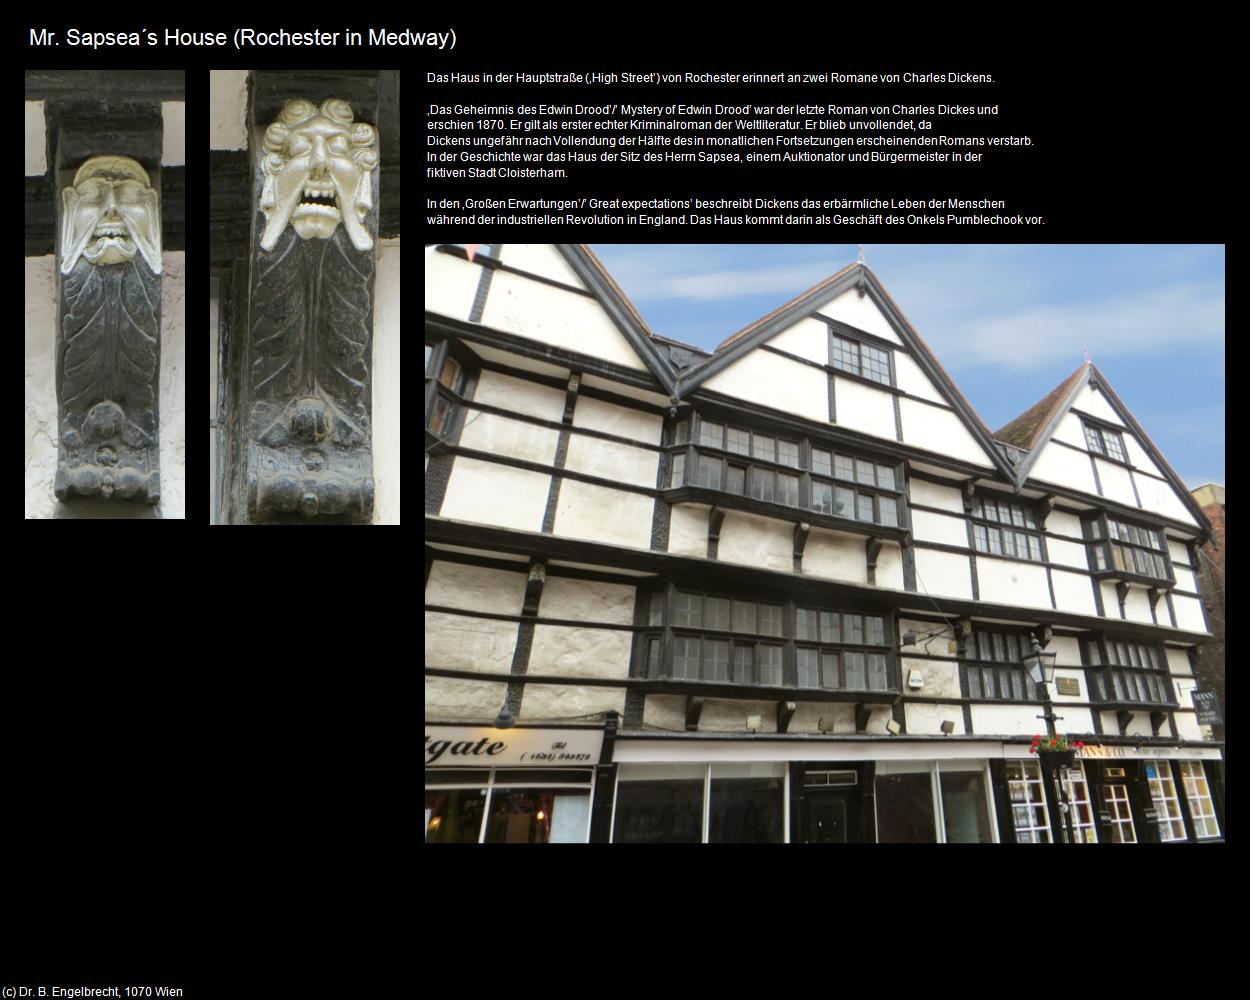 Mr. Sapsea‘s House (Rochester in Medway, England) in Kulturatlas-ENGLAND und WALES